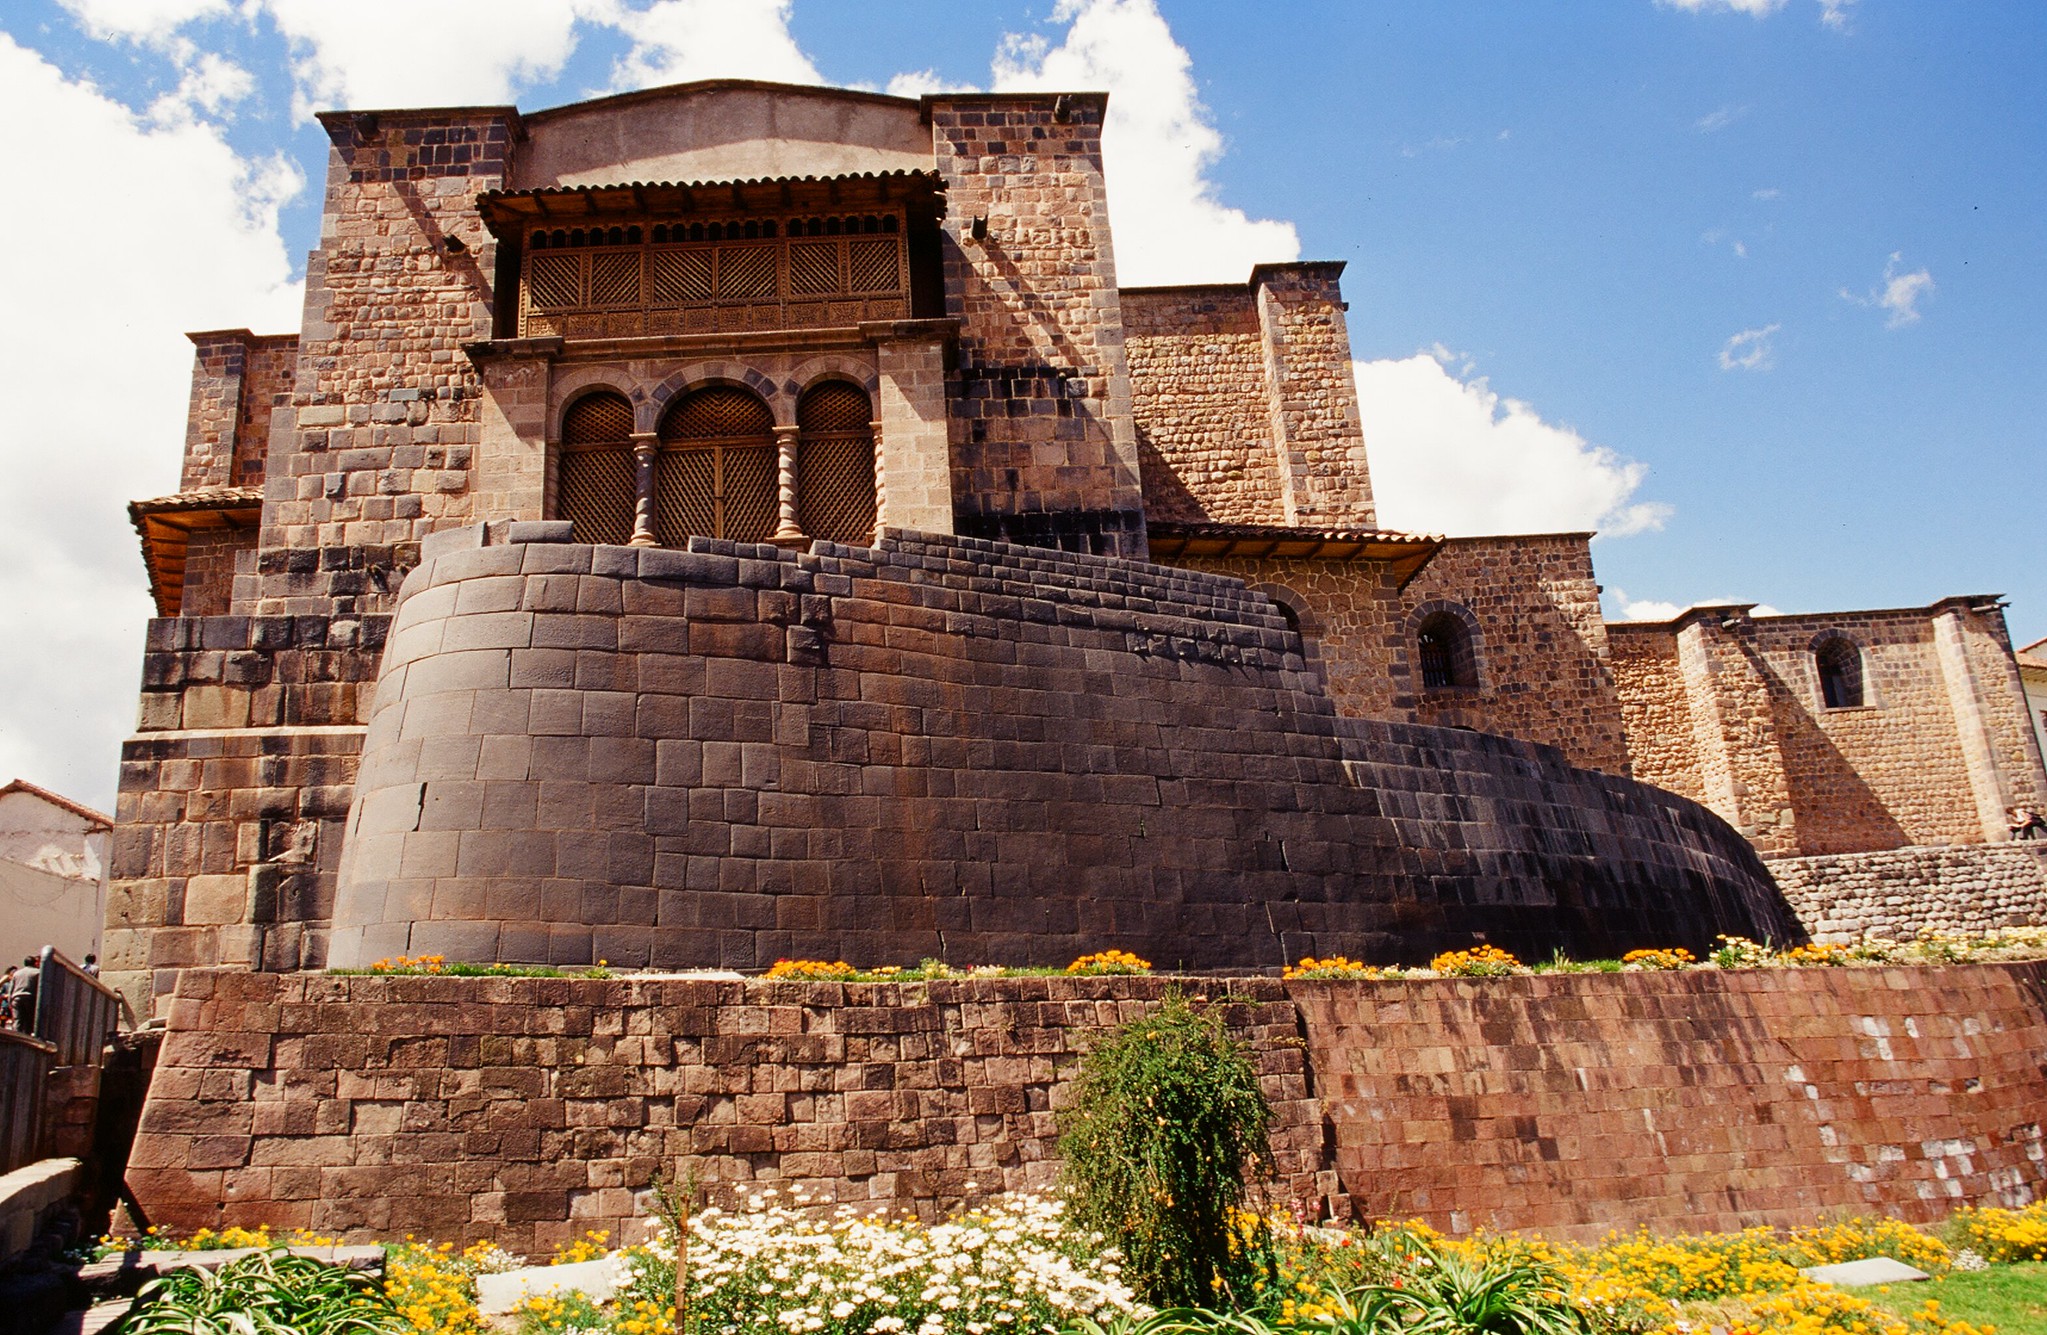 Foreground, Ruins of the Qorikancha (the Convent of Santo Domingo above), Cuzco, Peru (photo: Terry Feuerborn, CC BY-NC 2.0)